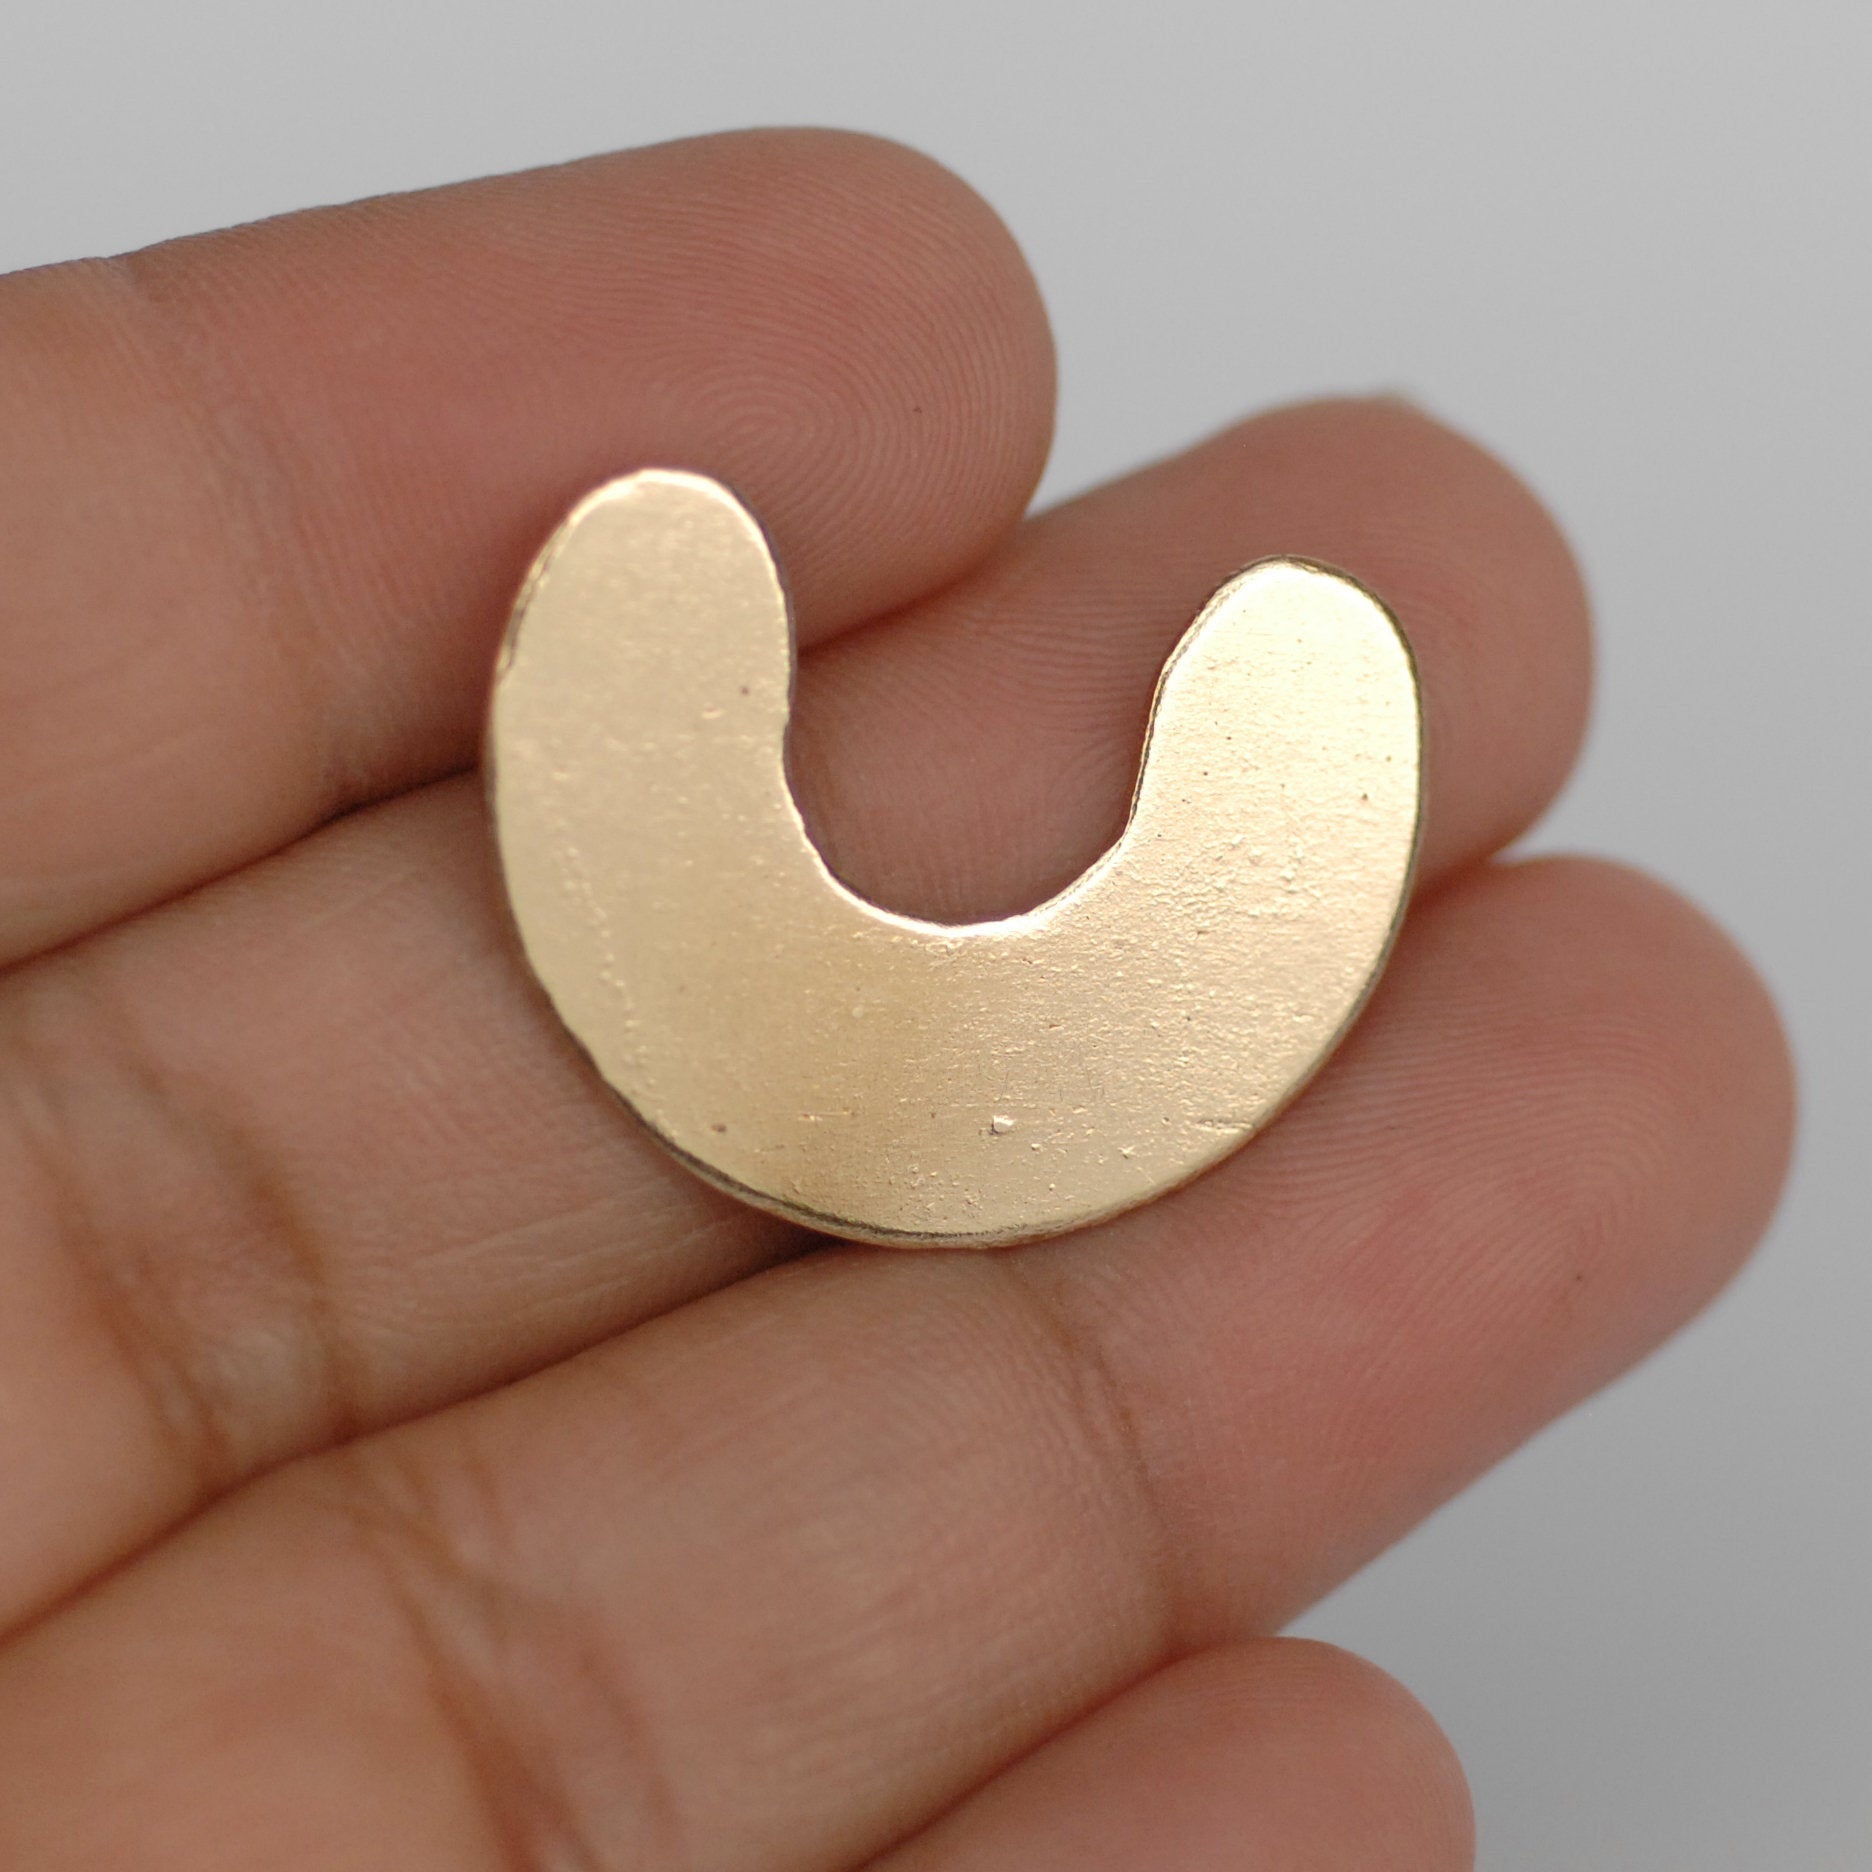 U Shaped Blank 25mm for Enameling or Hand Stamping Metal Blanks DIY Jewelry Making - 6 pieces